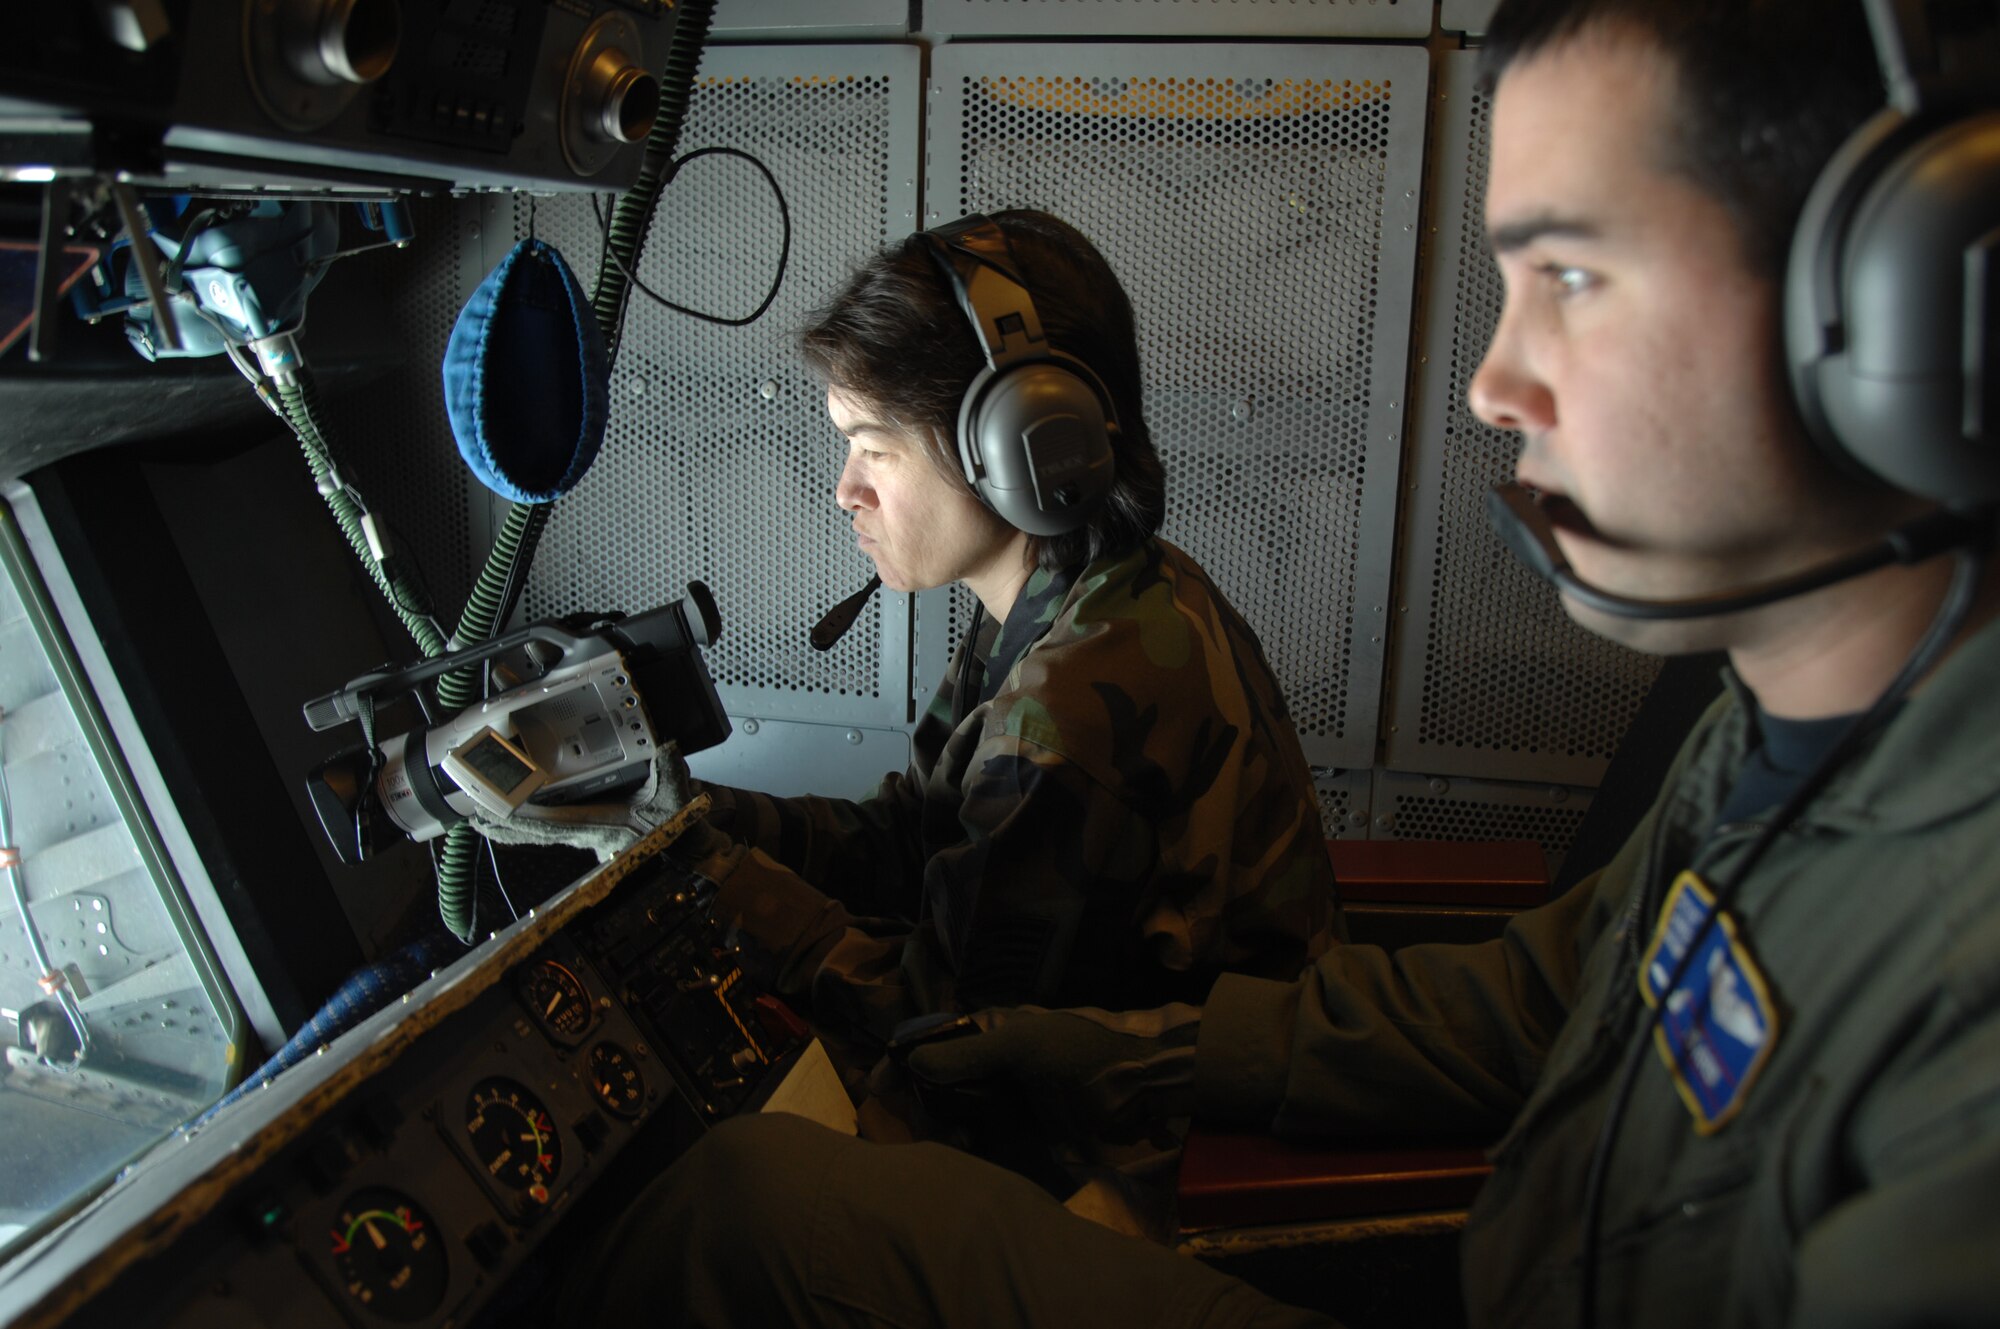 EIELSON AIR FORCE BASE, Alaska -- Technical Sgt Grace Lamoureux (left), 354th Communications Squadron, Eielson Air Force Base, Alaska records a Navy F/A-18 from Strike Fighter Squadron Eight Seven (VFA-87) refueling behind KC-10 Extender, call sign "Shaman Five One"  while Staff Sgt Angel Gomez, KC-10 Boom Operator, 78th Air Refueling Squadron, McGuire Air Force Base, New Jersey operates the drouge during a refueling mission here on 18 April in support of Red Flag-Alaska 07-1. Red Flag-Alaska is a Pacific Air Forces-directed field training exercise for U.S. forces flown under simulated air combat conditions. (U.S. Air Force photo by Staff Sgt. Joshua Strang)